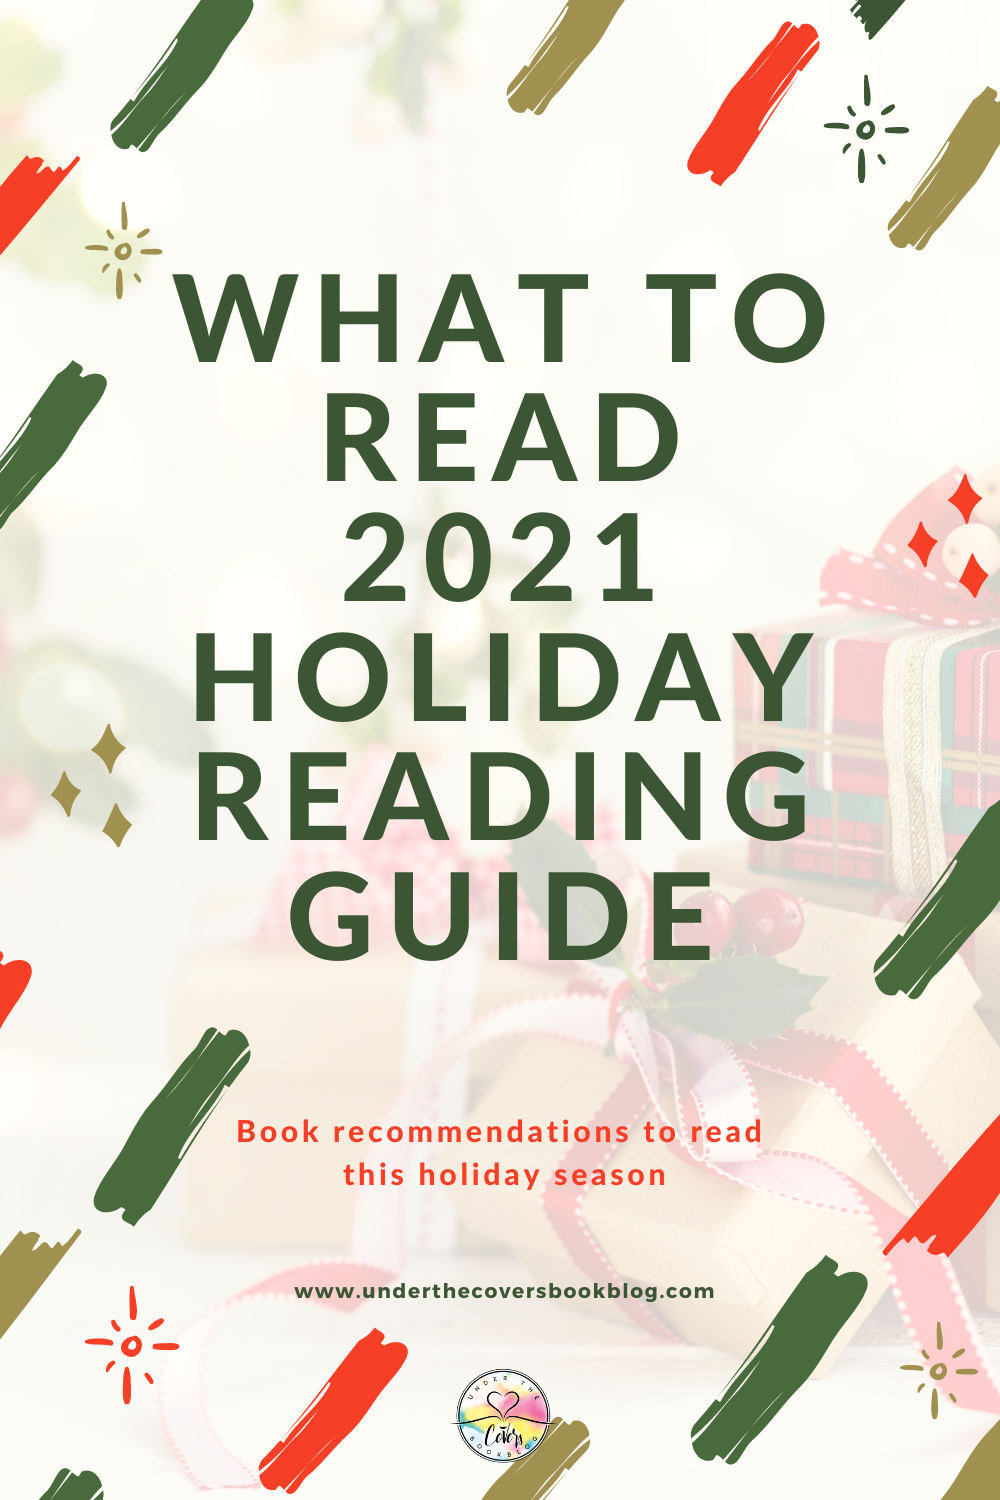 Bring Me Home for Christmas: UTC’s Holiday Reading Guide